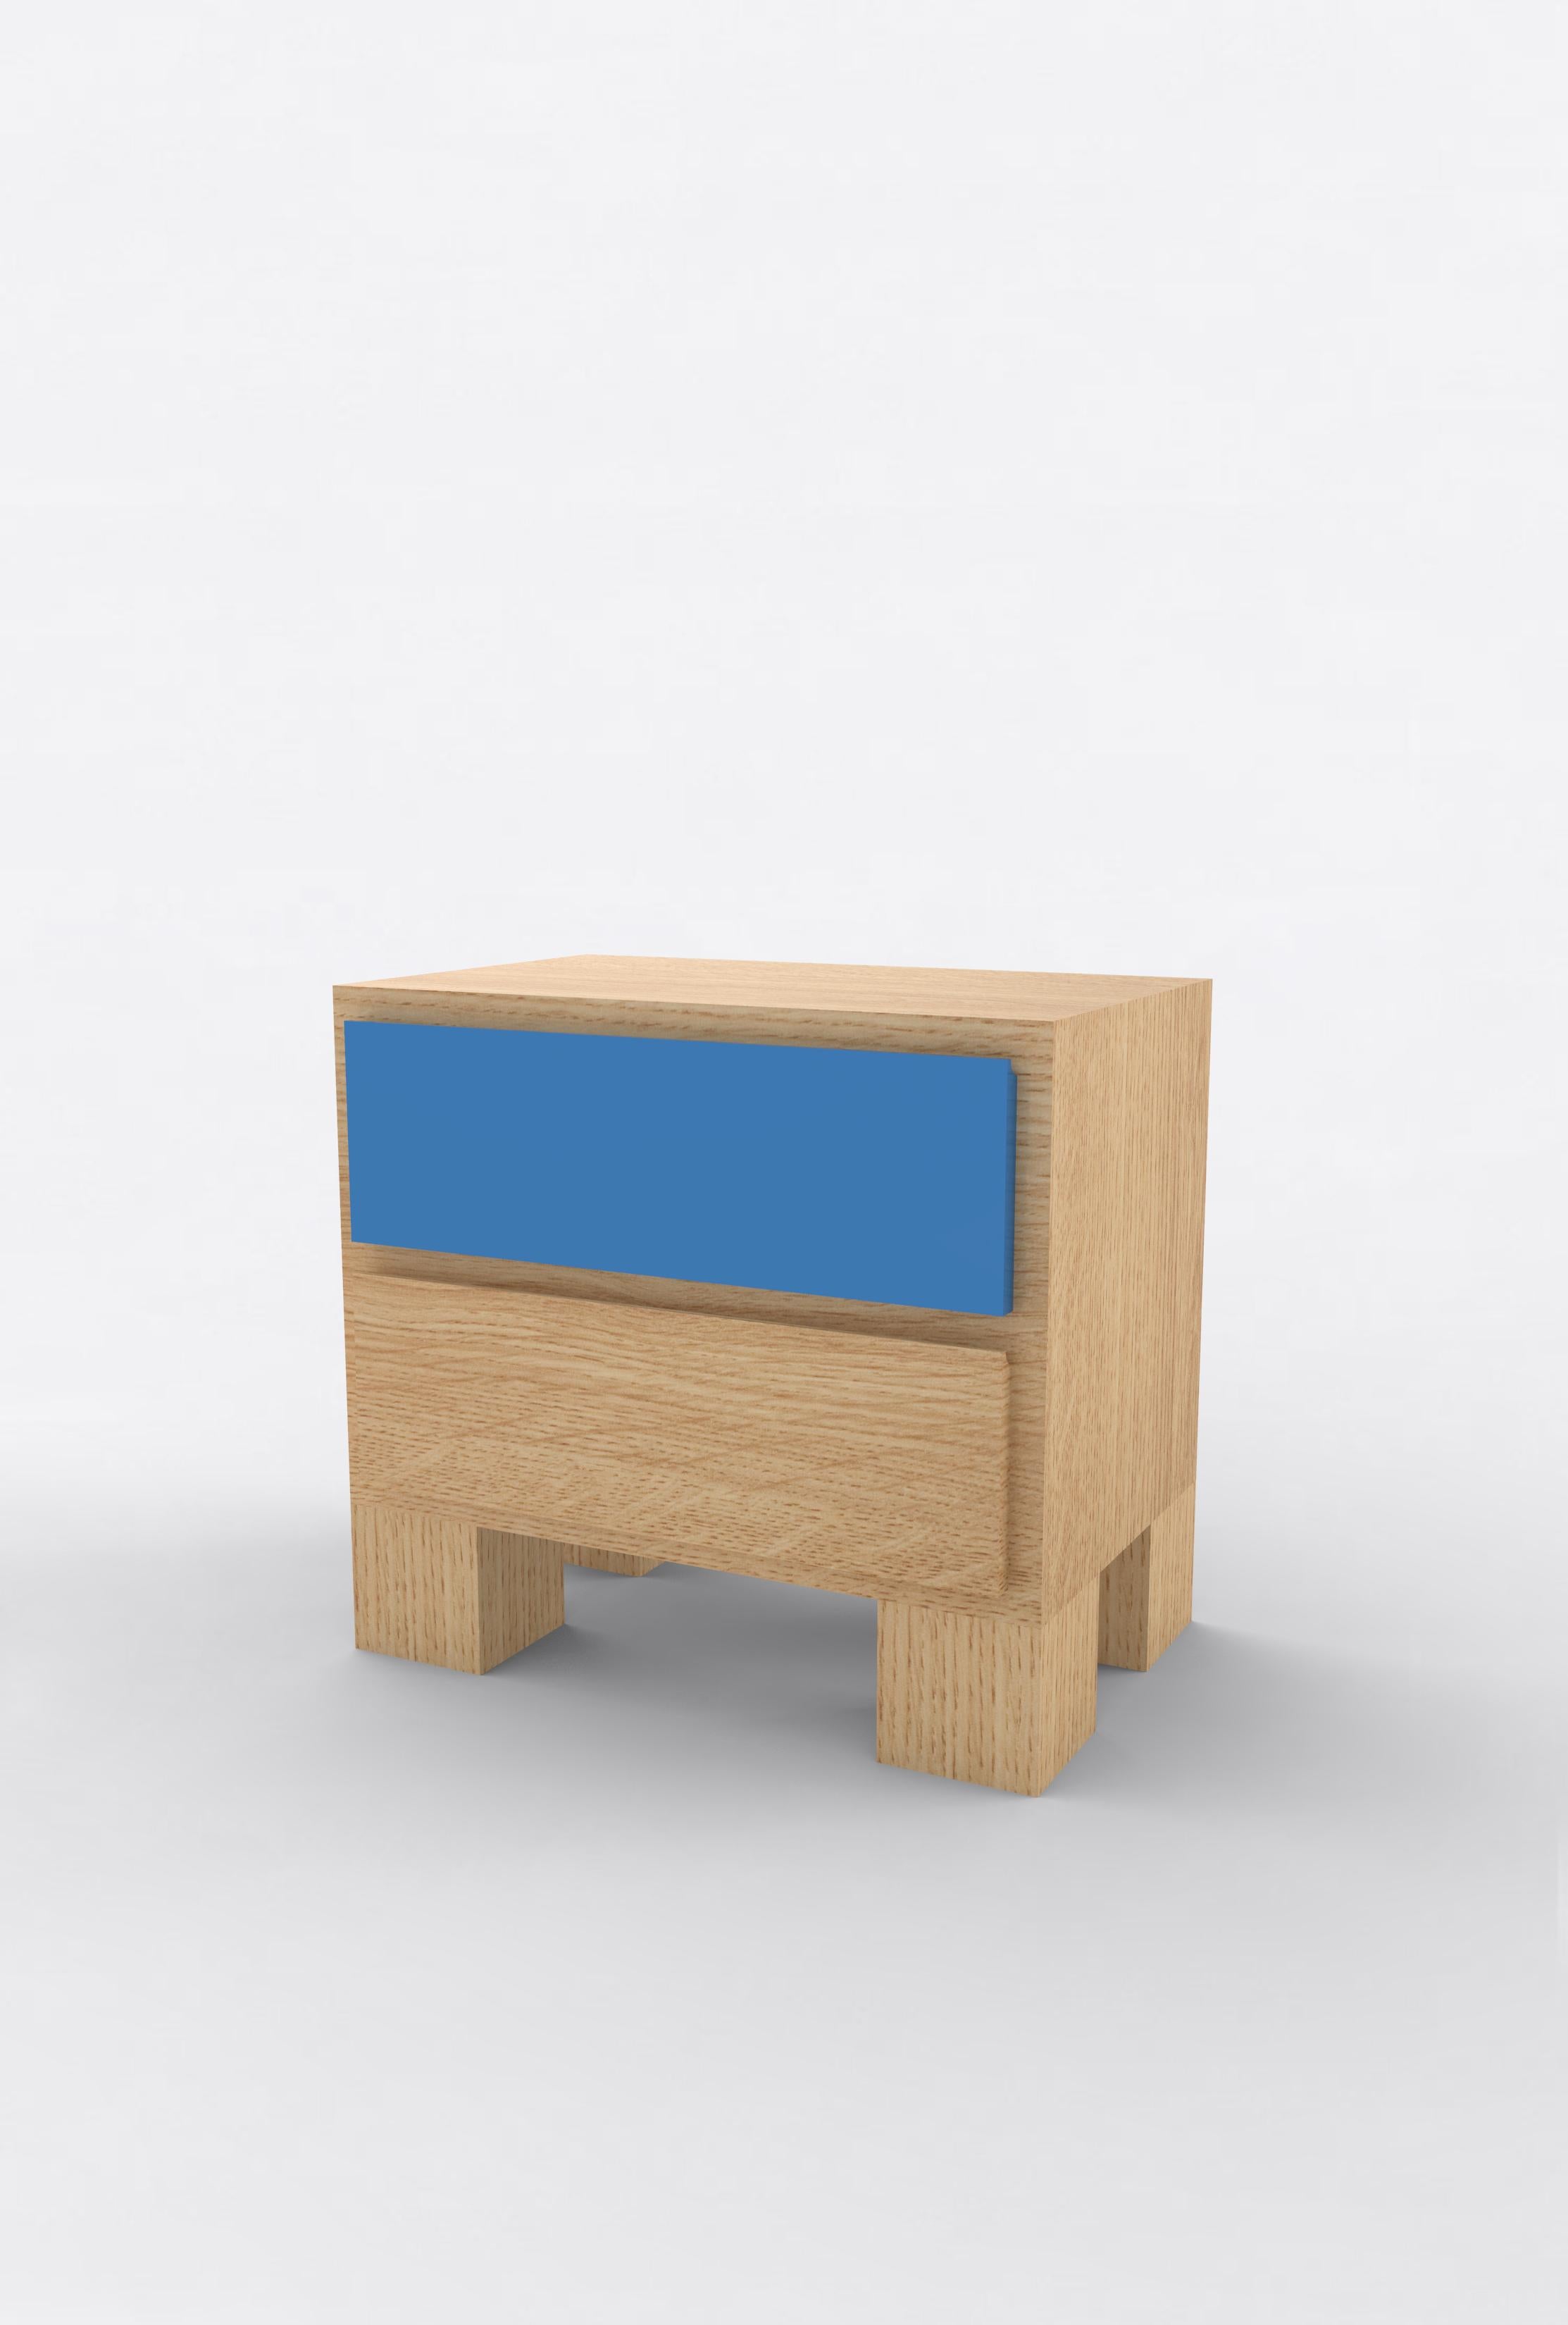 Orphan Work 101 Bedside, 2020
Shown in oak and color
Available in natural oak with painted drawer
Measures: 24” W x 15” D x 22” H
2 drawers

Additional dimensions, materials or finishes available upon request. 
Prices may vary depending. 

Orphan